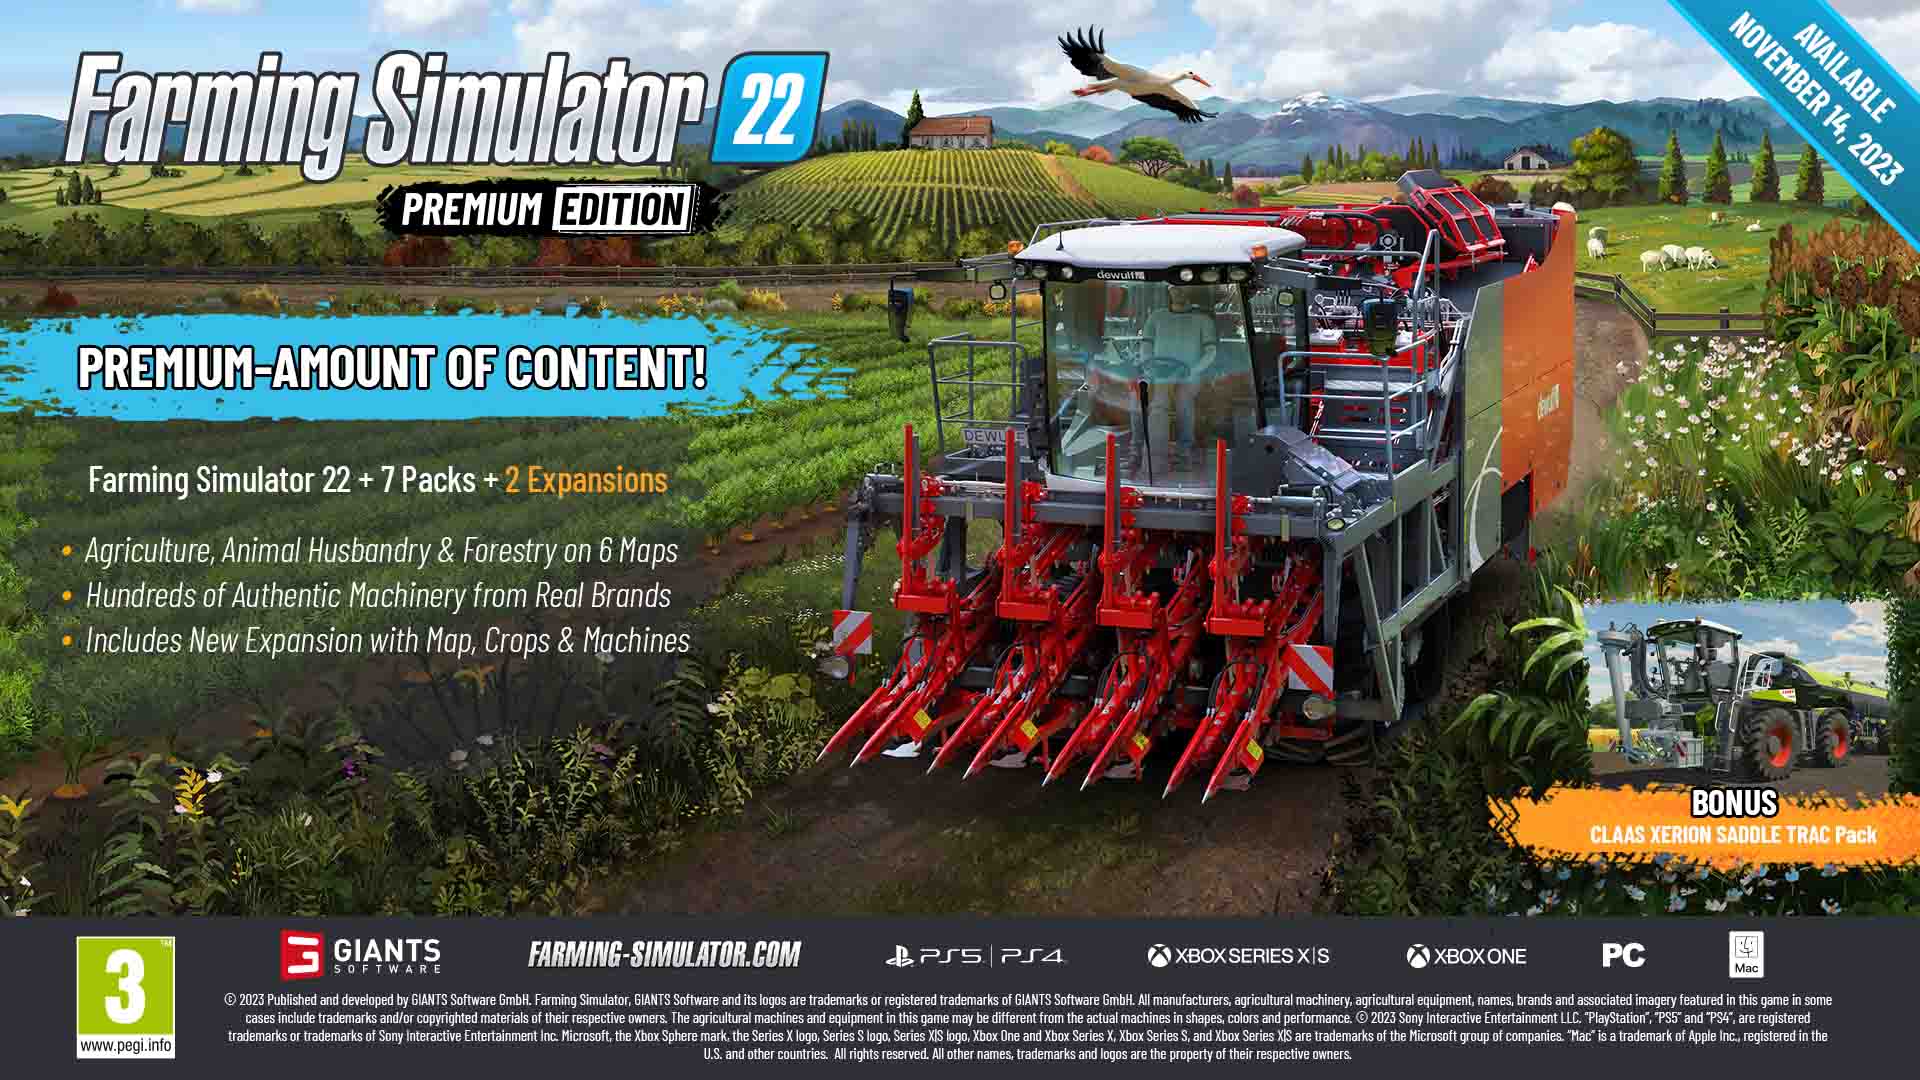 Giants Software Announces Upcoming Farming Simulator 23 for